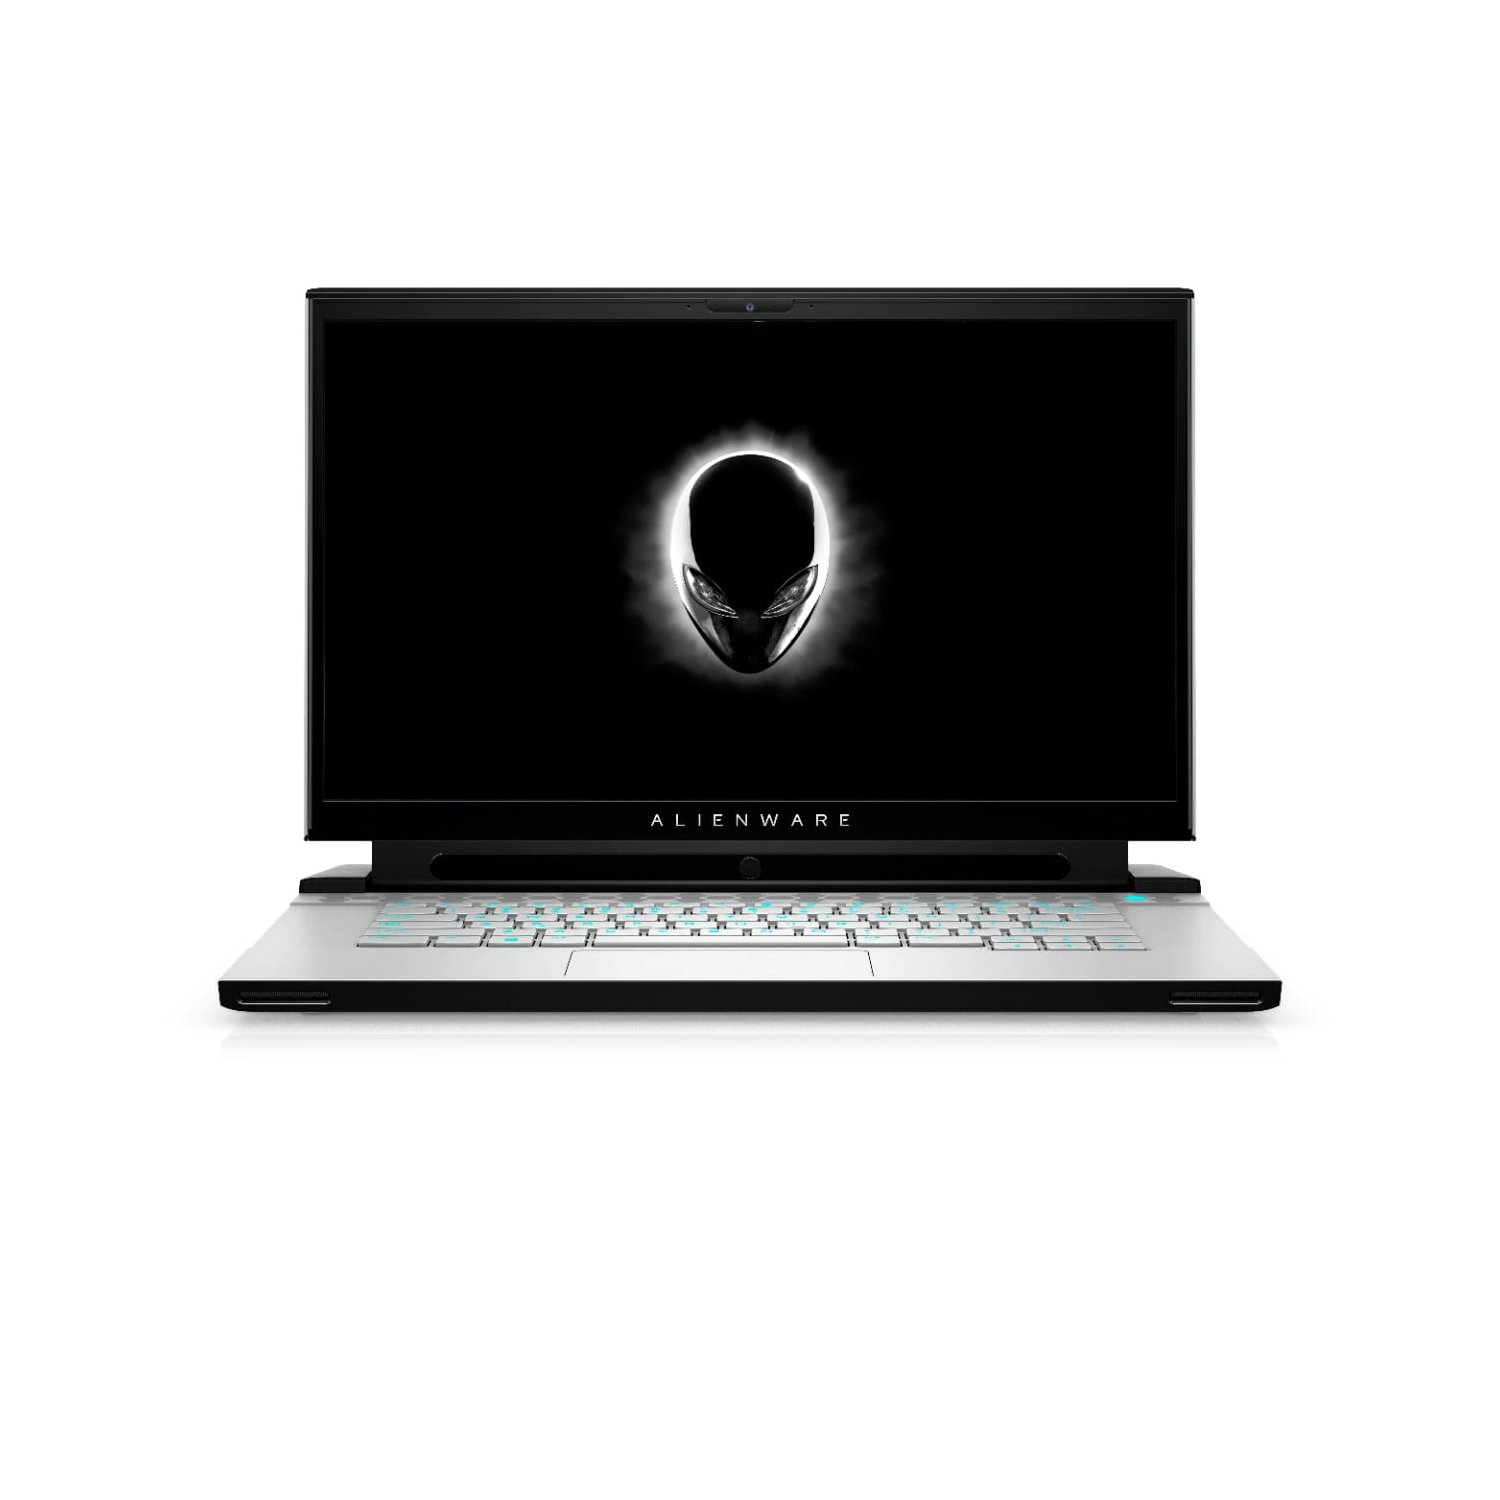 Refurbished (Excellent) - Dell Alienware m15 R3 Gaming Laptop (2020), 15.6" FHD, Core i7, 256GB SSD + 256GB SSD, 16GB RAM, RTX 2070, 5 GHz, 10th Gen CPU Certified